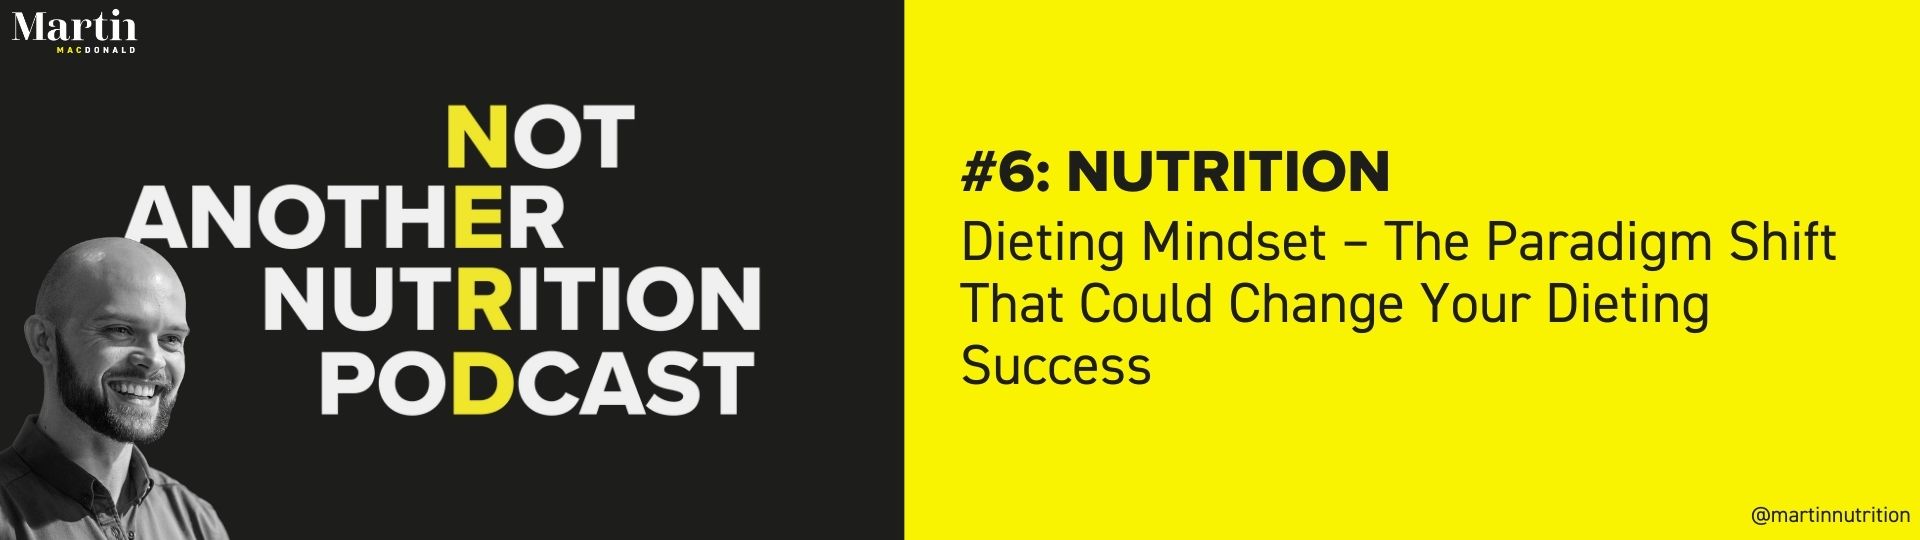 Dieting Mindset - The Paradigm Shift That Could Change Your Dieting Success